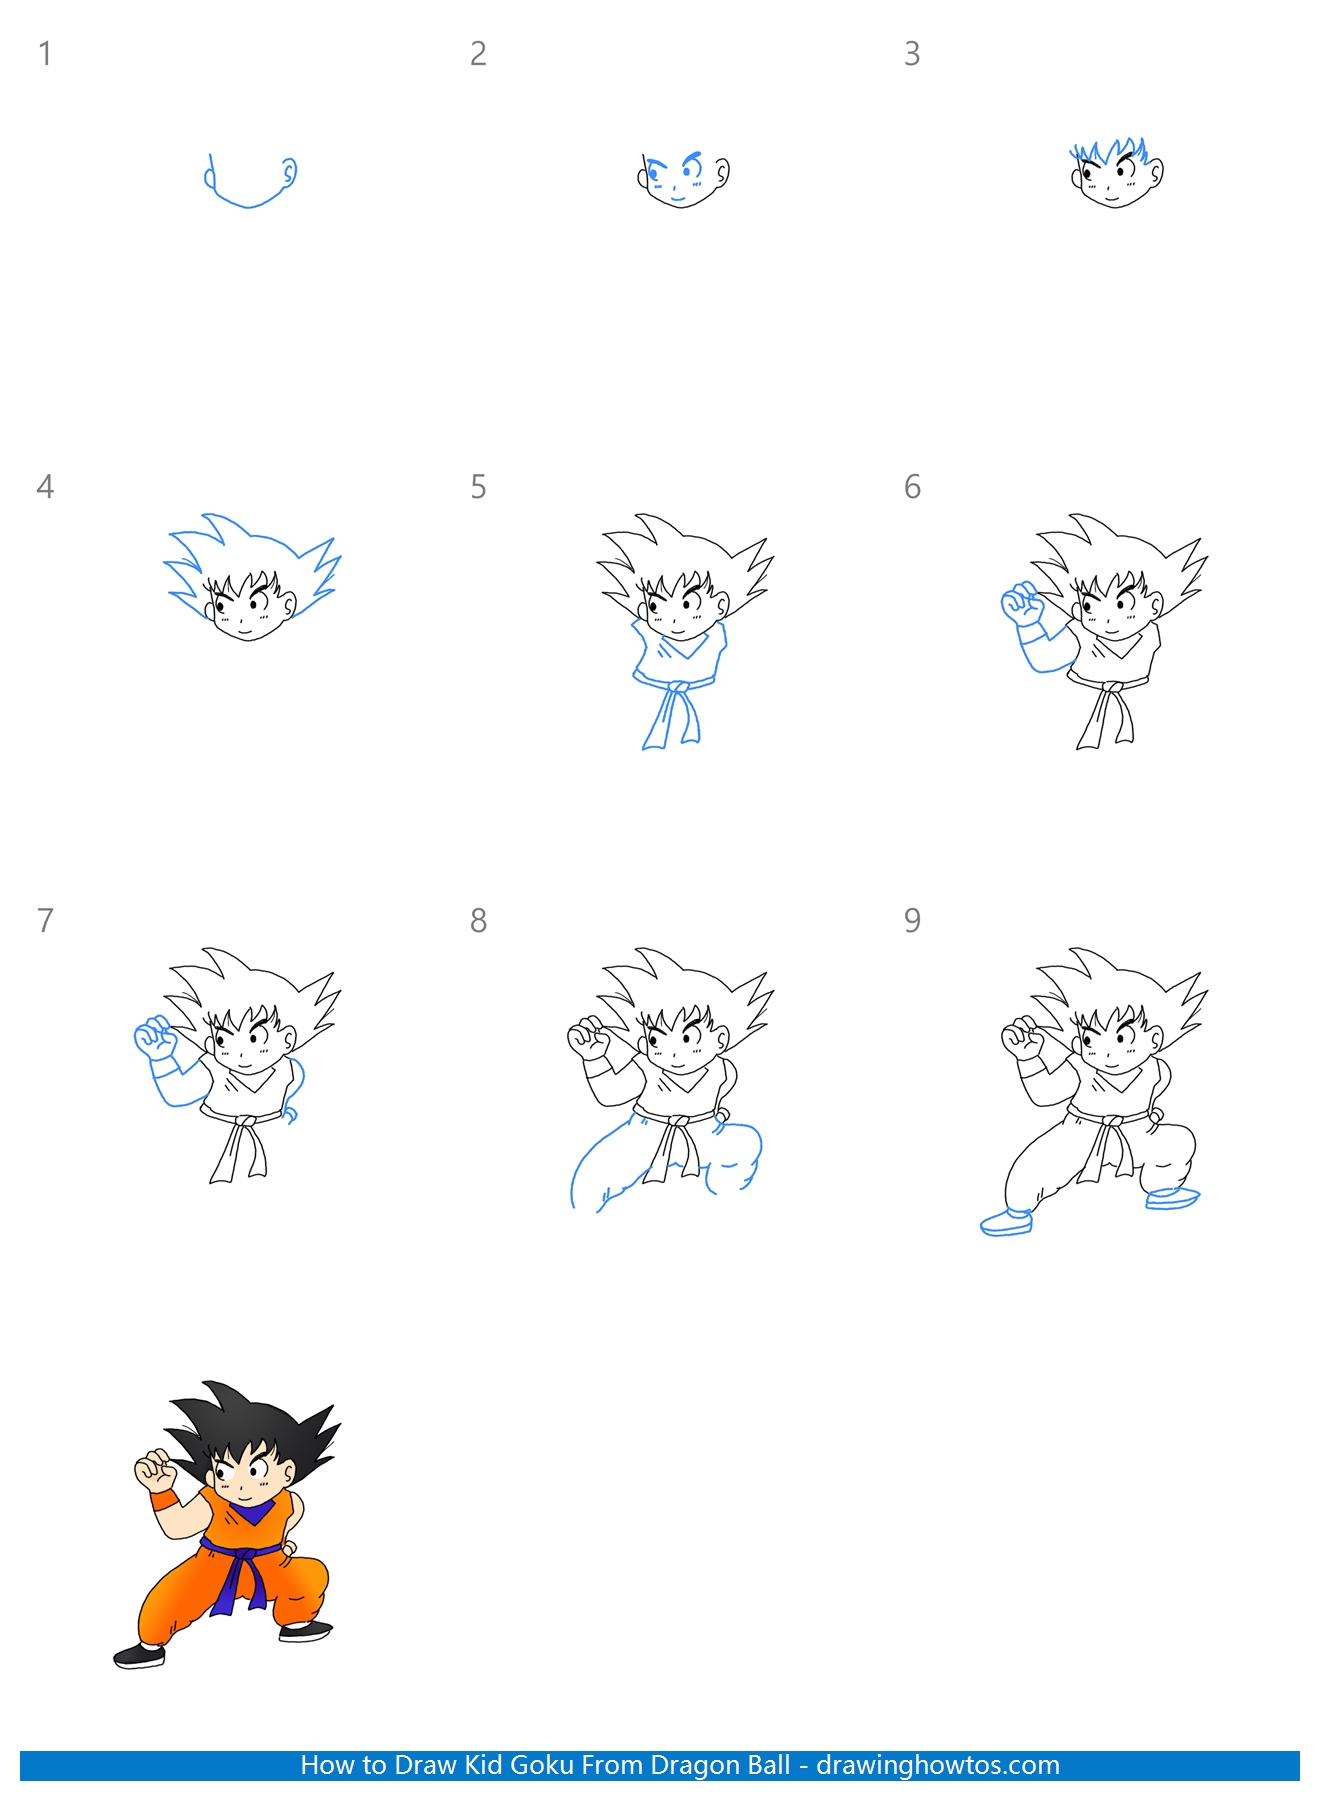 How to Draw Kid Goku from Dragon Ball Step by Step